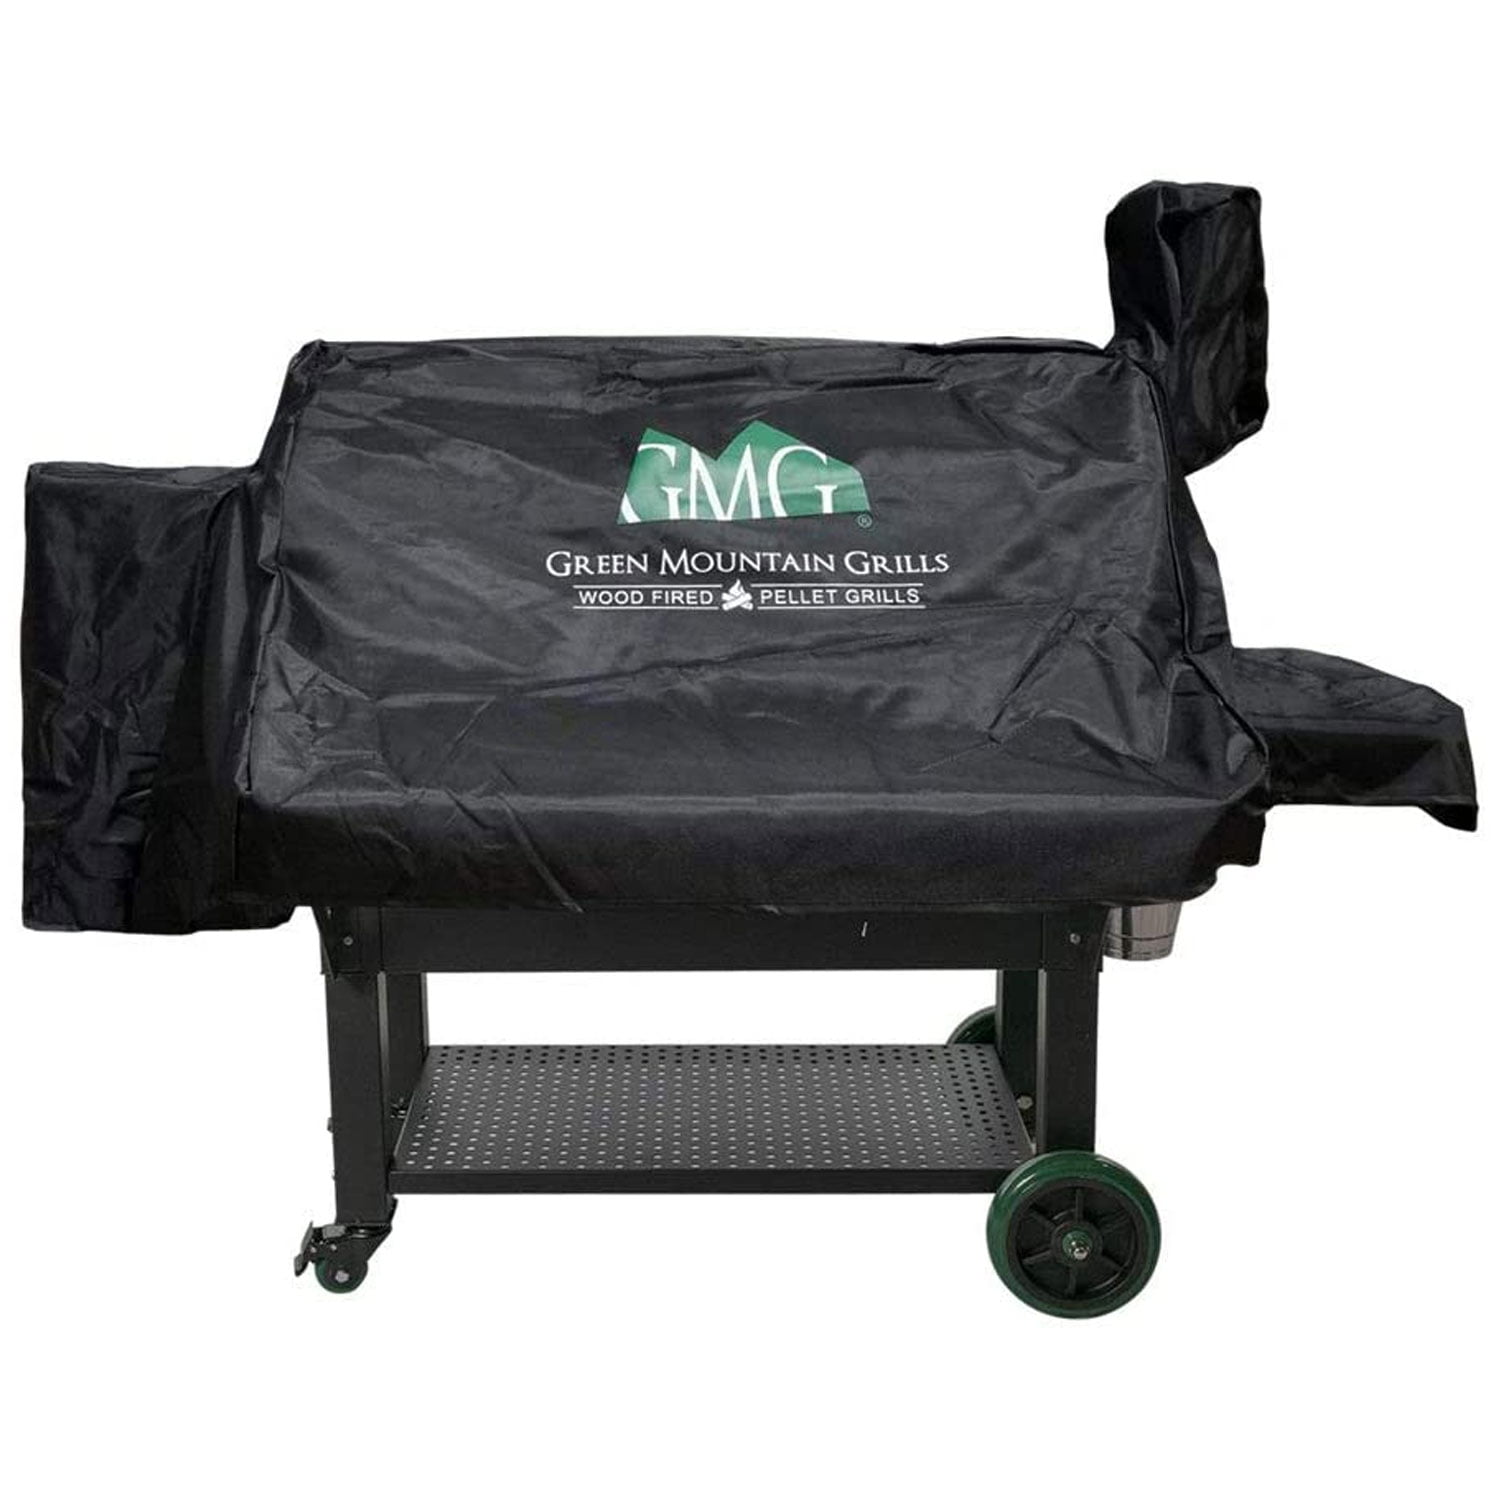 QuliMetal DC Grill Cover for Green Mountain Grills Davy Crockett Grill Anti-UV & Waterproof Heavy Duty Patio BBQ Grill Cover